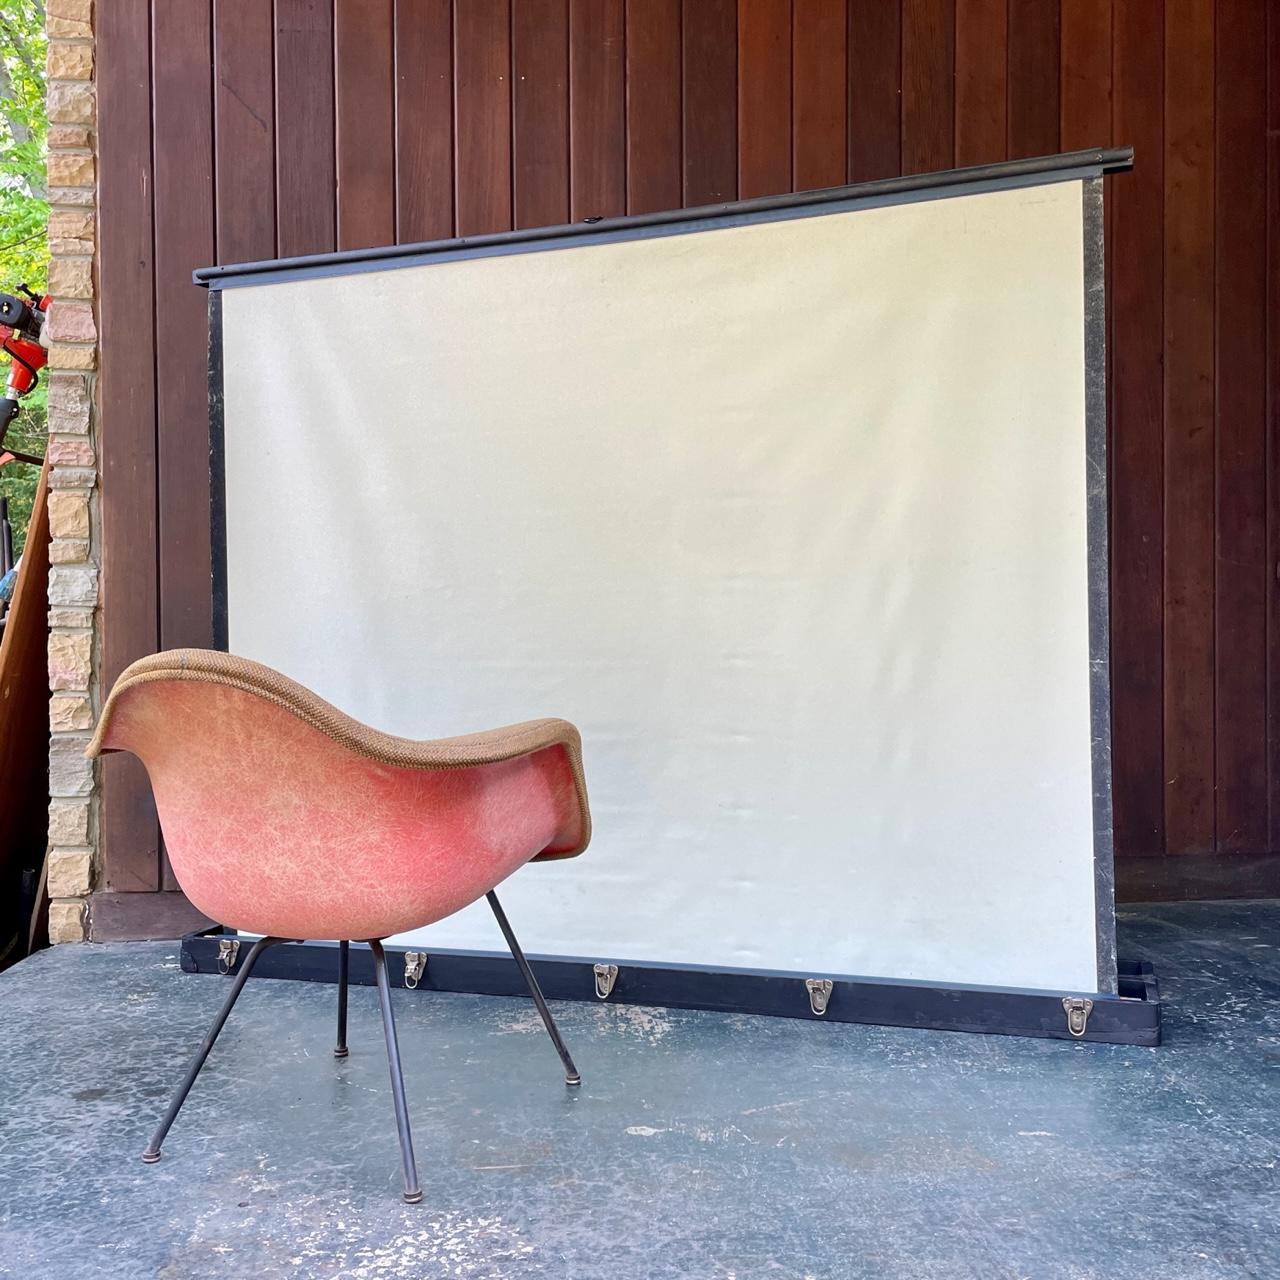 Very large roll-up movie screen in a box.

Overall W 75 x D 12.5 x H 57.5 in.
Screen W 68 x H 53 in.